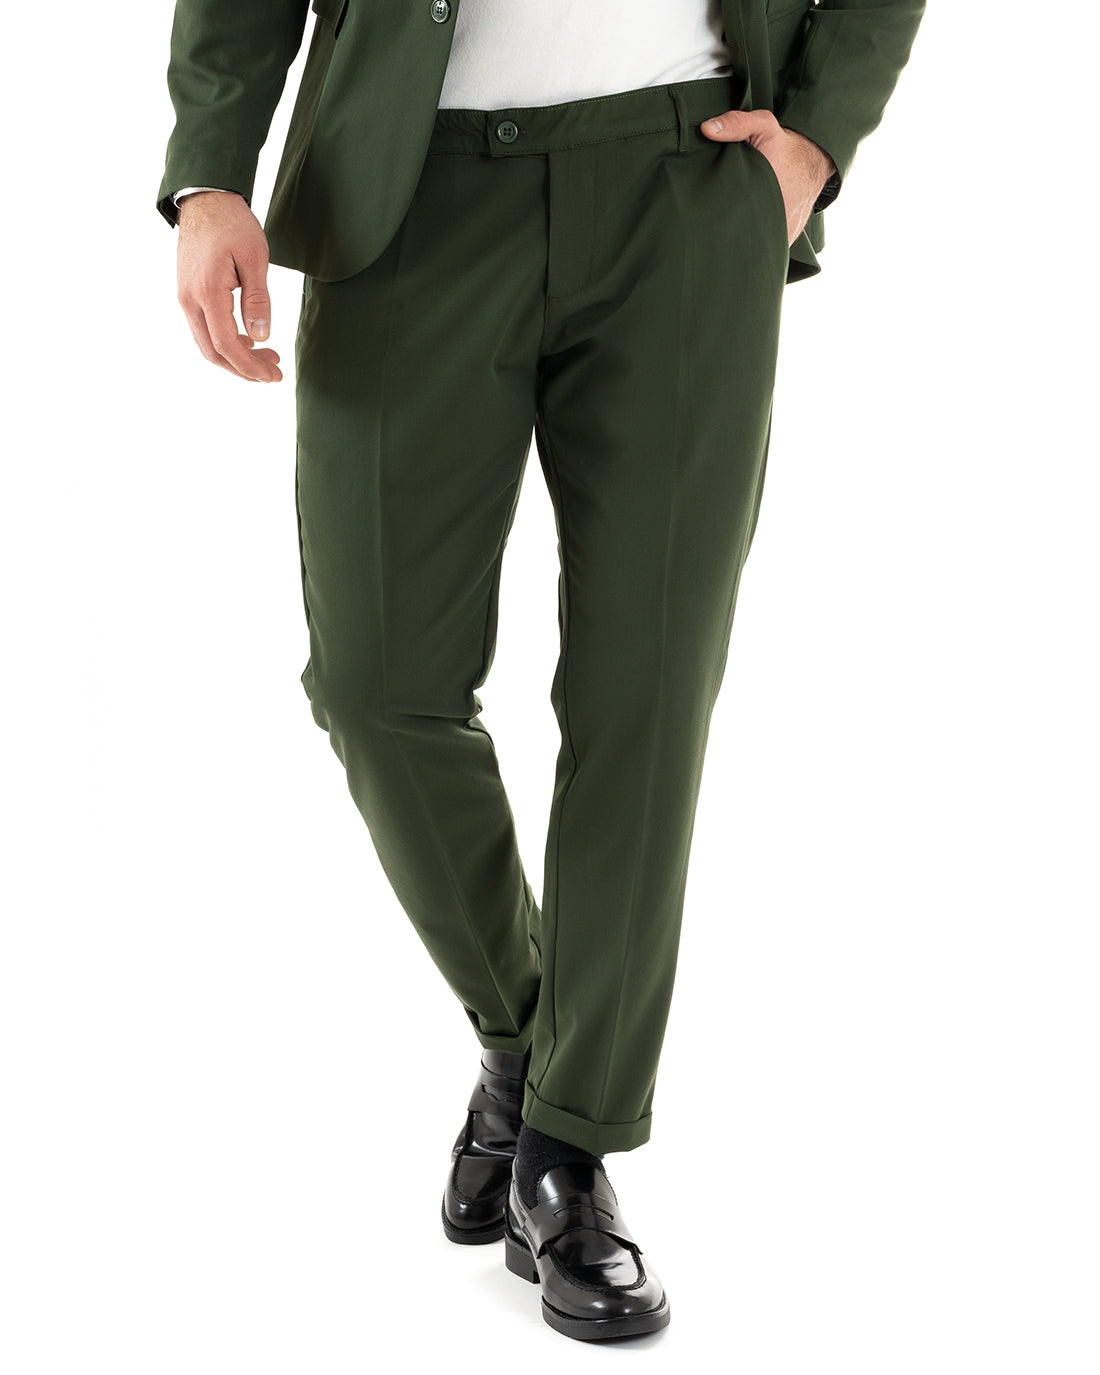 Single Breasted Men's Suit Tailored Viscose Suit Jacket Trousers Green Elegant Casual GIOSAL-OU2237A